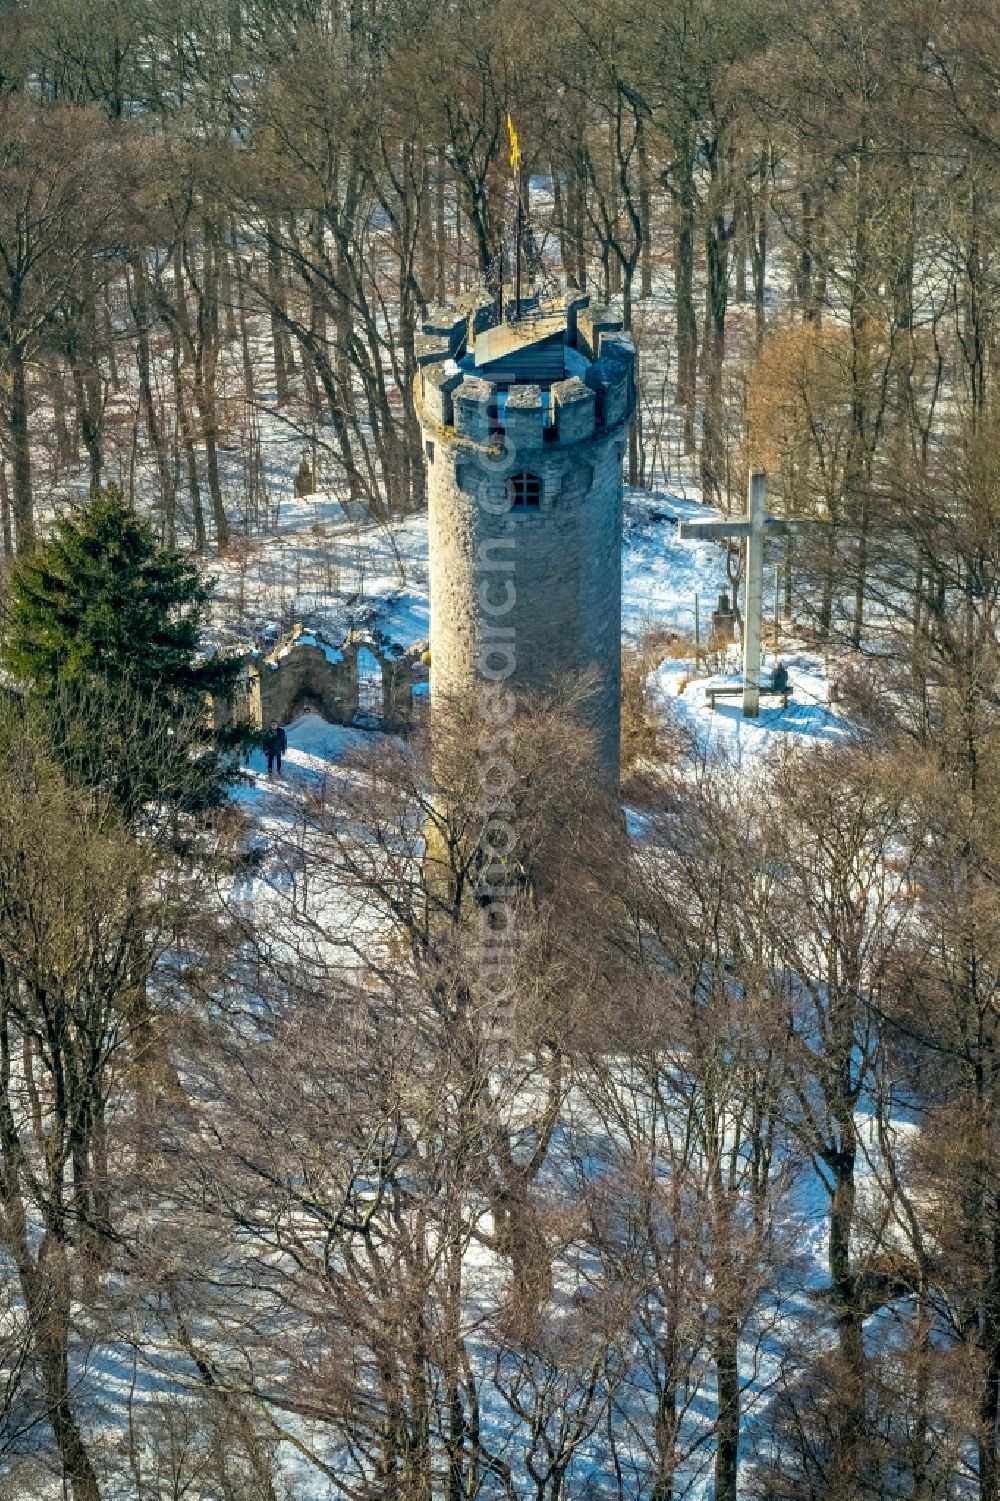 Marsberg from above - Wintry snowy structure of the observation tower Bilsteinturm in Marsberg in the state North Rhine-Westphalia